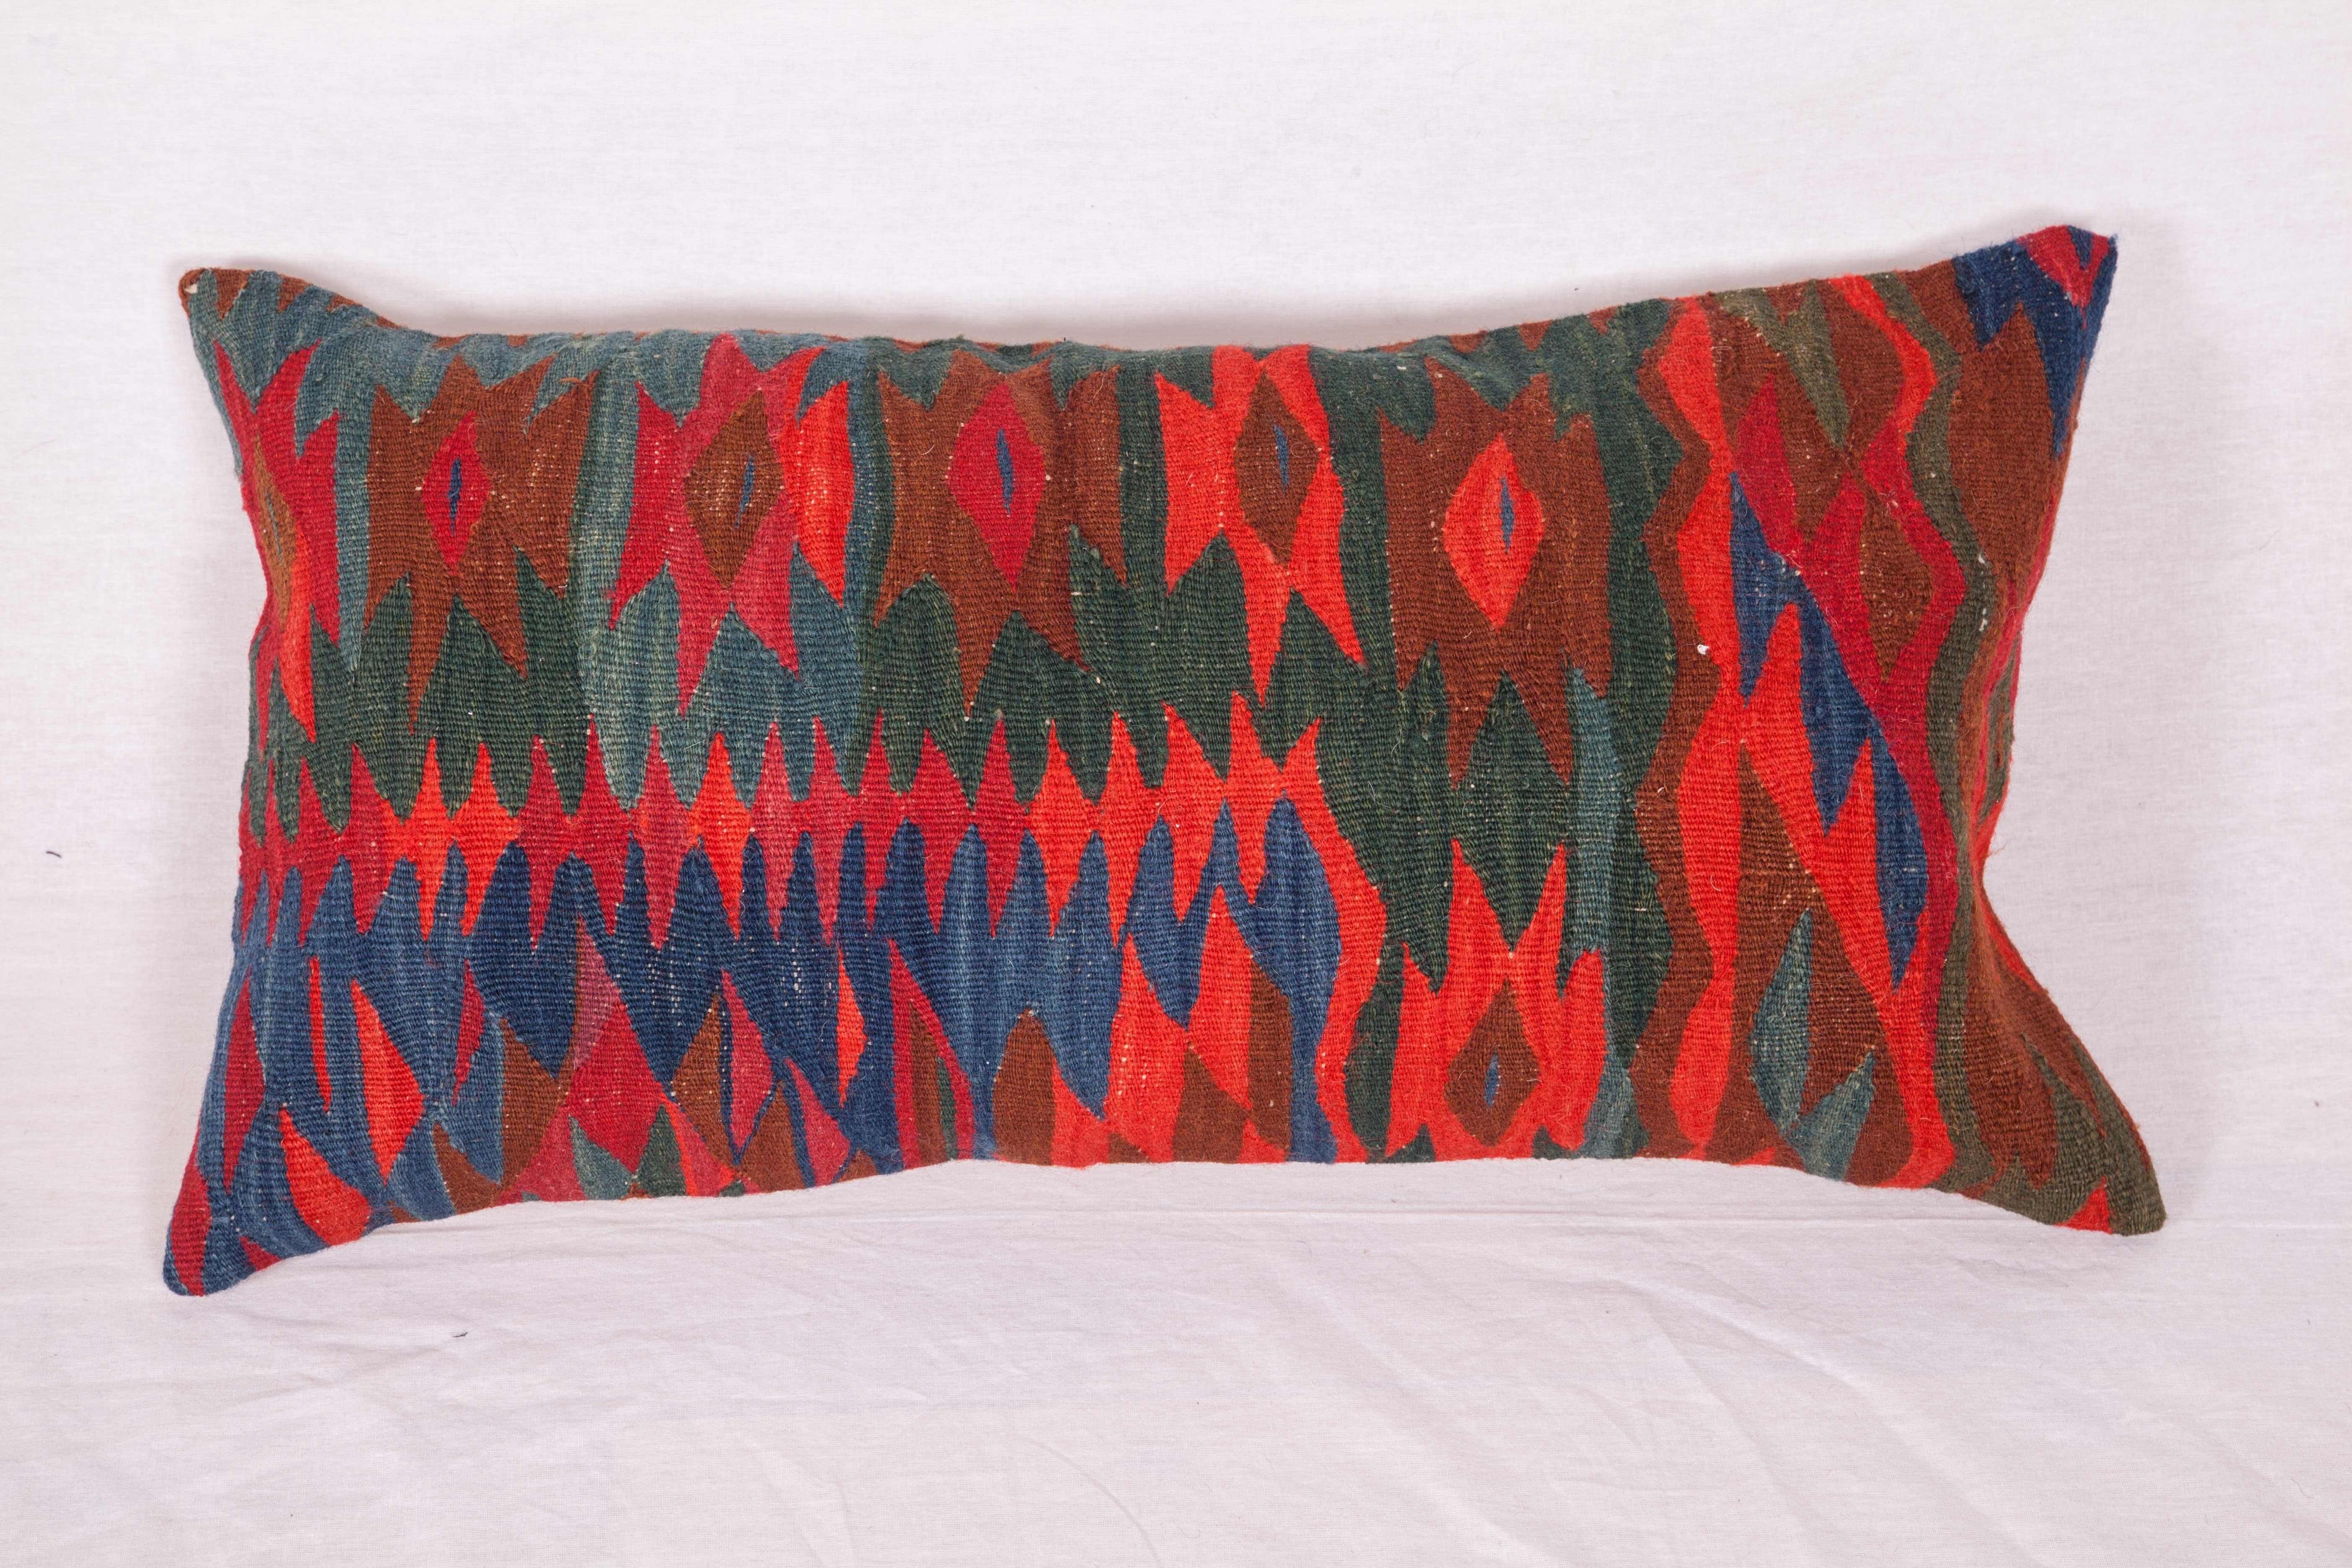 Hand-Woven Antique Kilim Pillow Cases Fashioned from a Late 19th Century Sharkoy Kilim